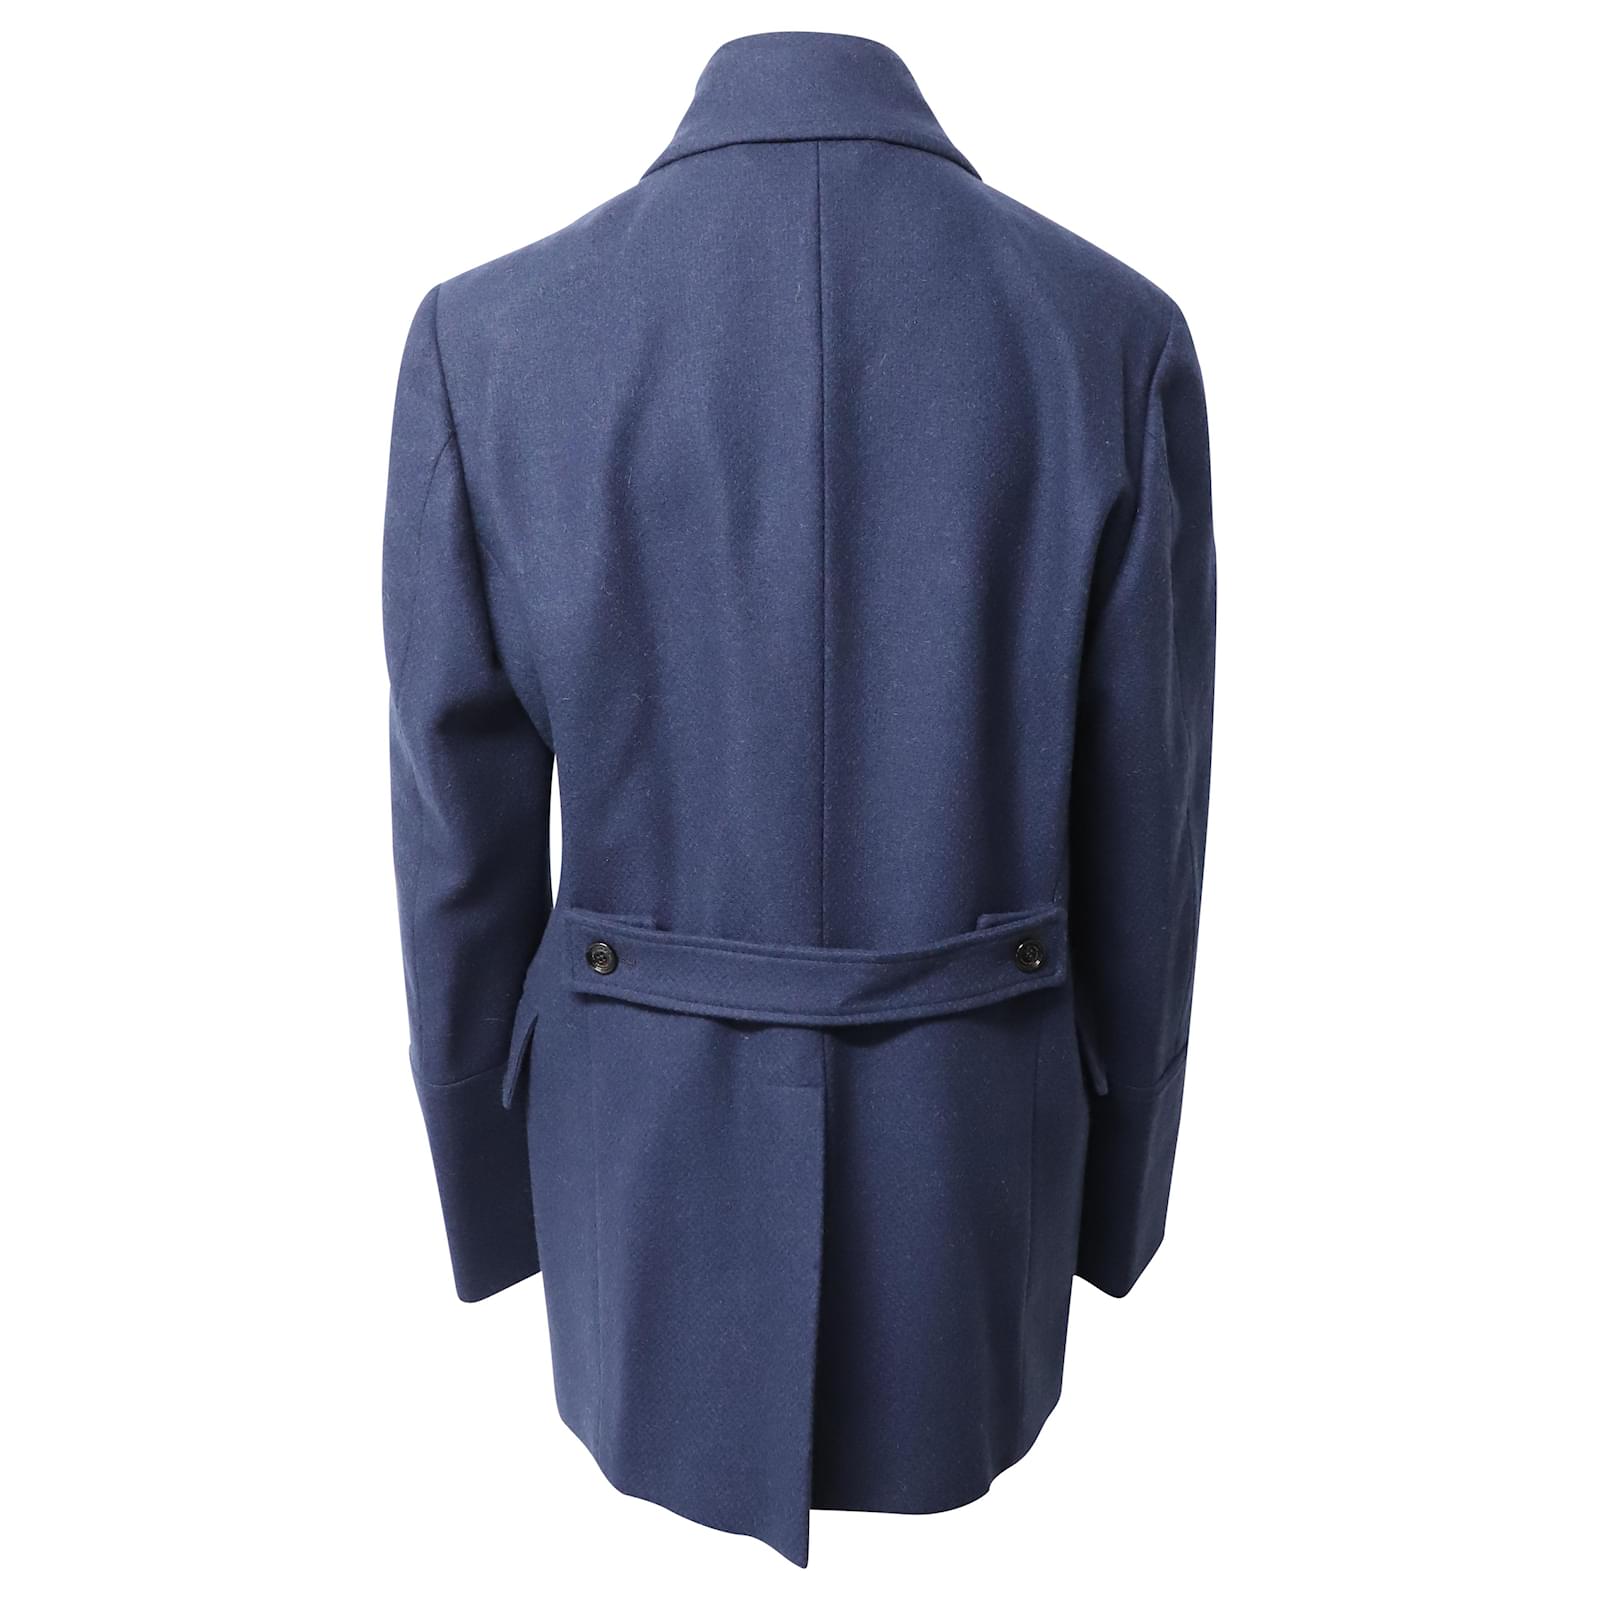 Burberry lined-Breasted Peacoat in Navy Blue Wool ref.498969 - Joli Closet